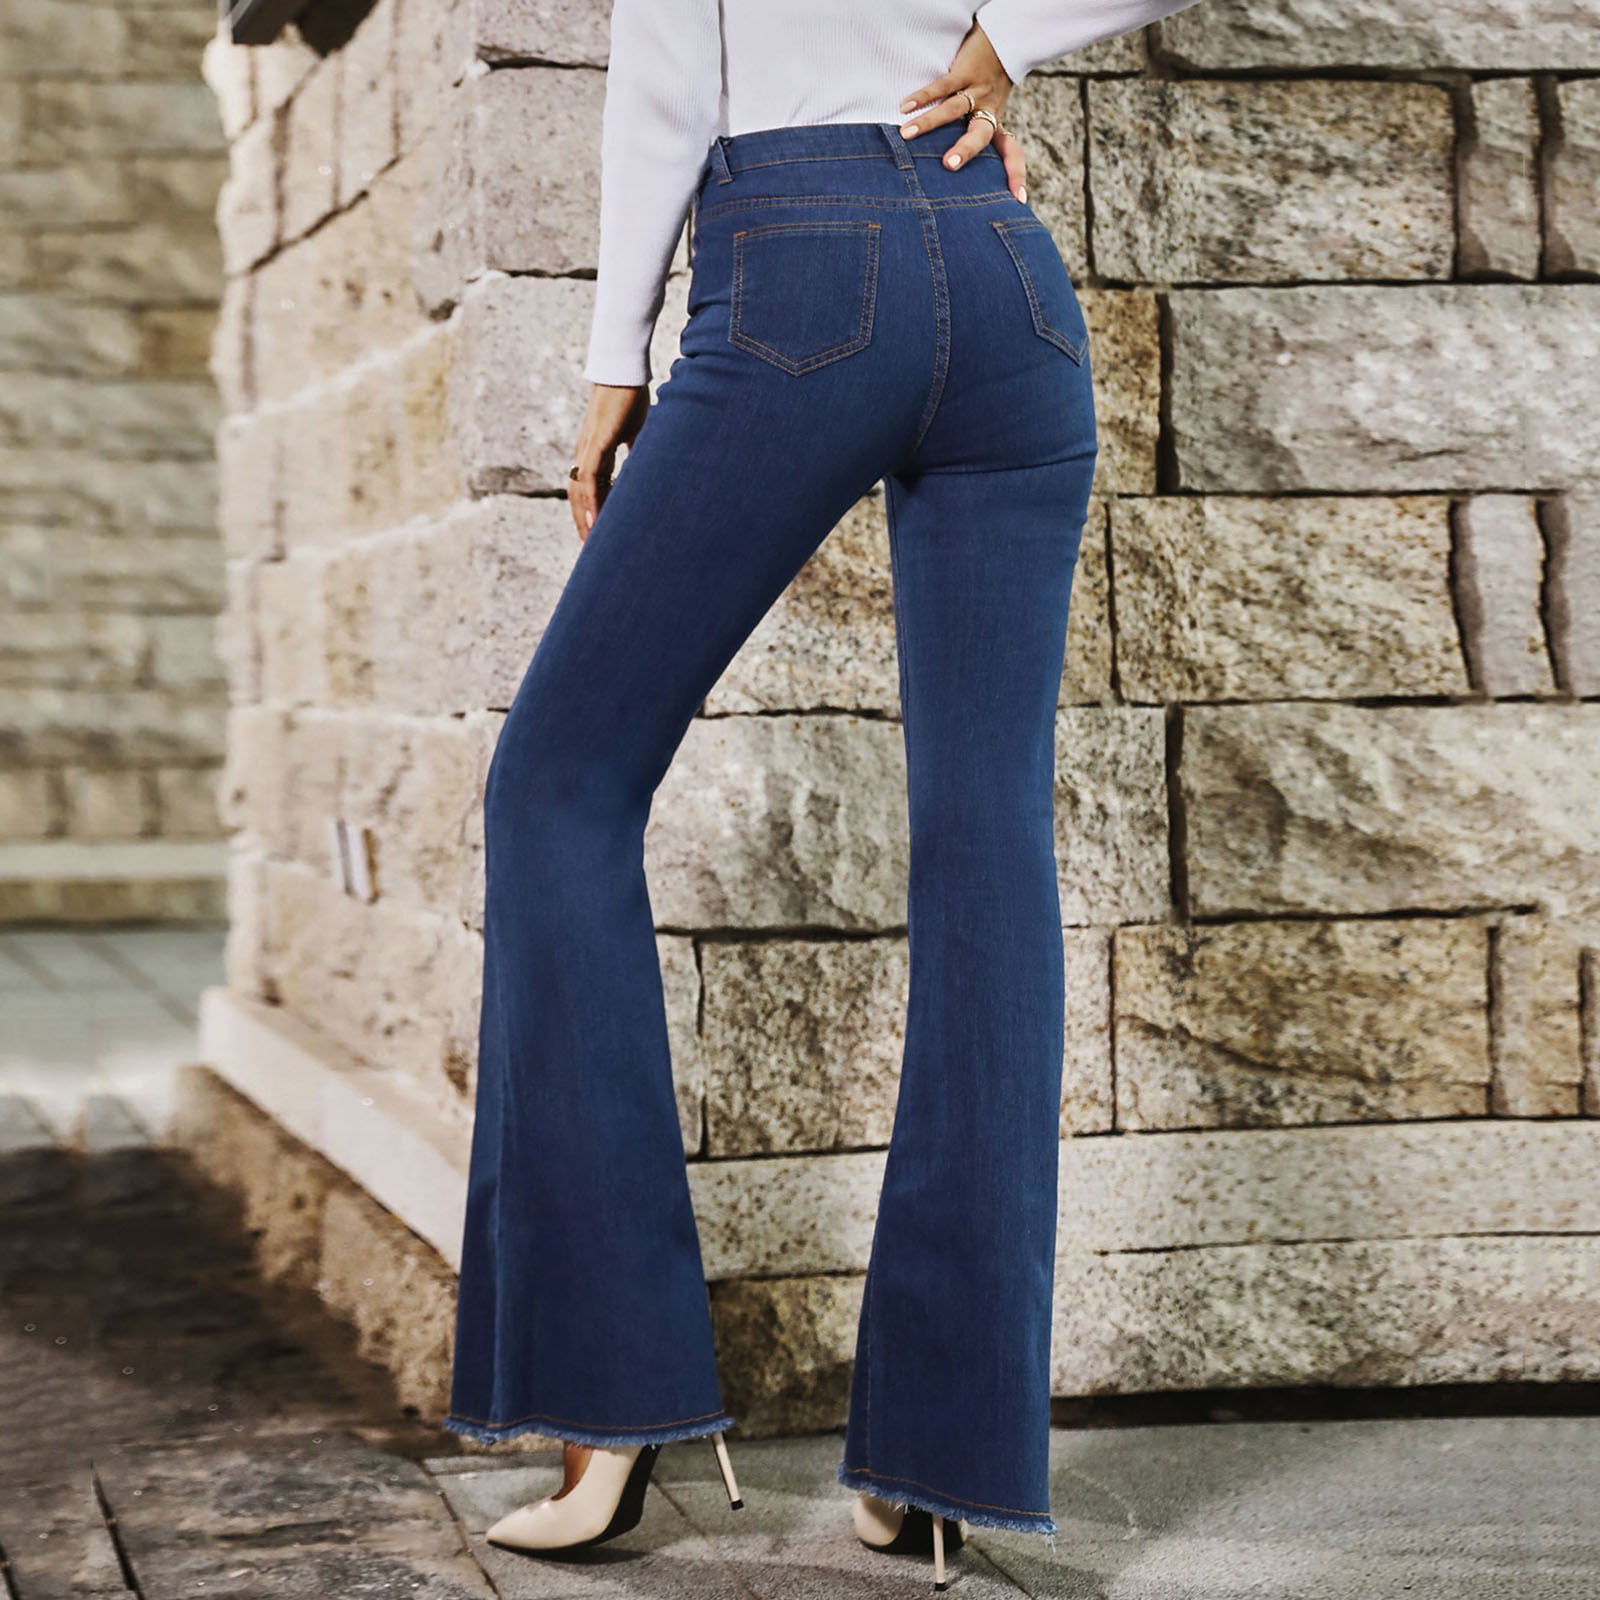 B91xZ Work Pants For Women High Waist Spring And Autumn New Wide Leg  Elastic Slim Stitching Denim Flared Jeans Jeans For Women BU1,Size XS 